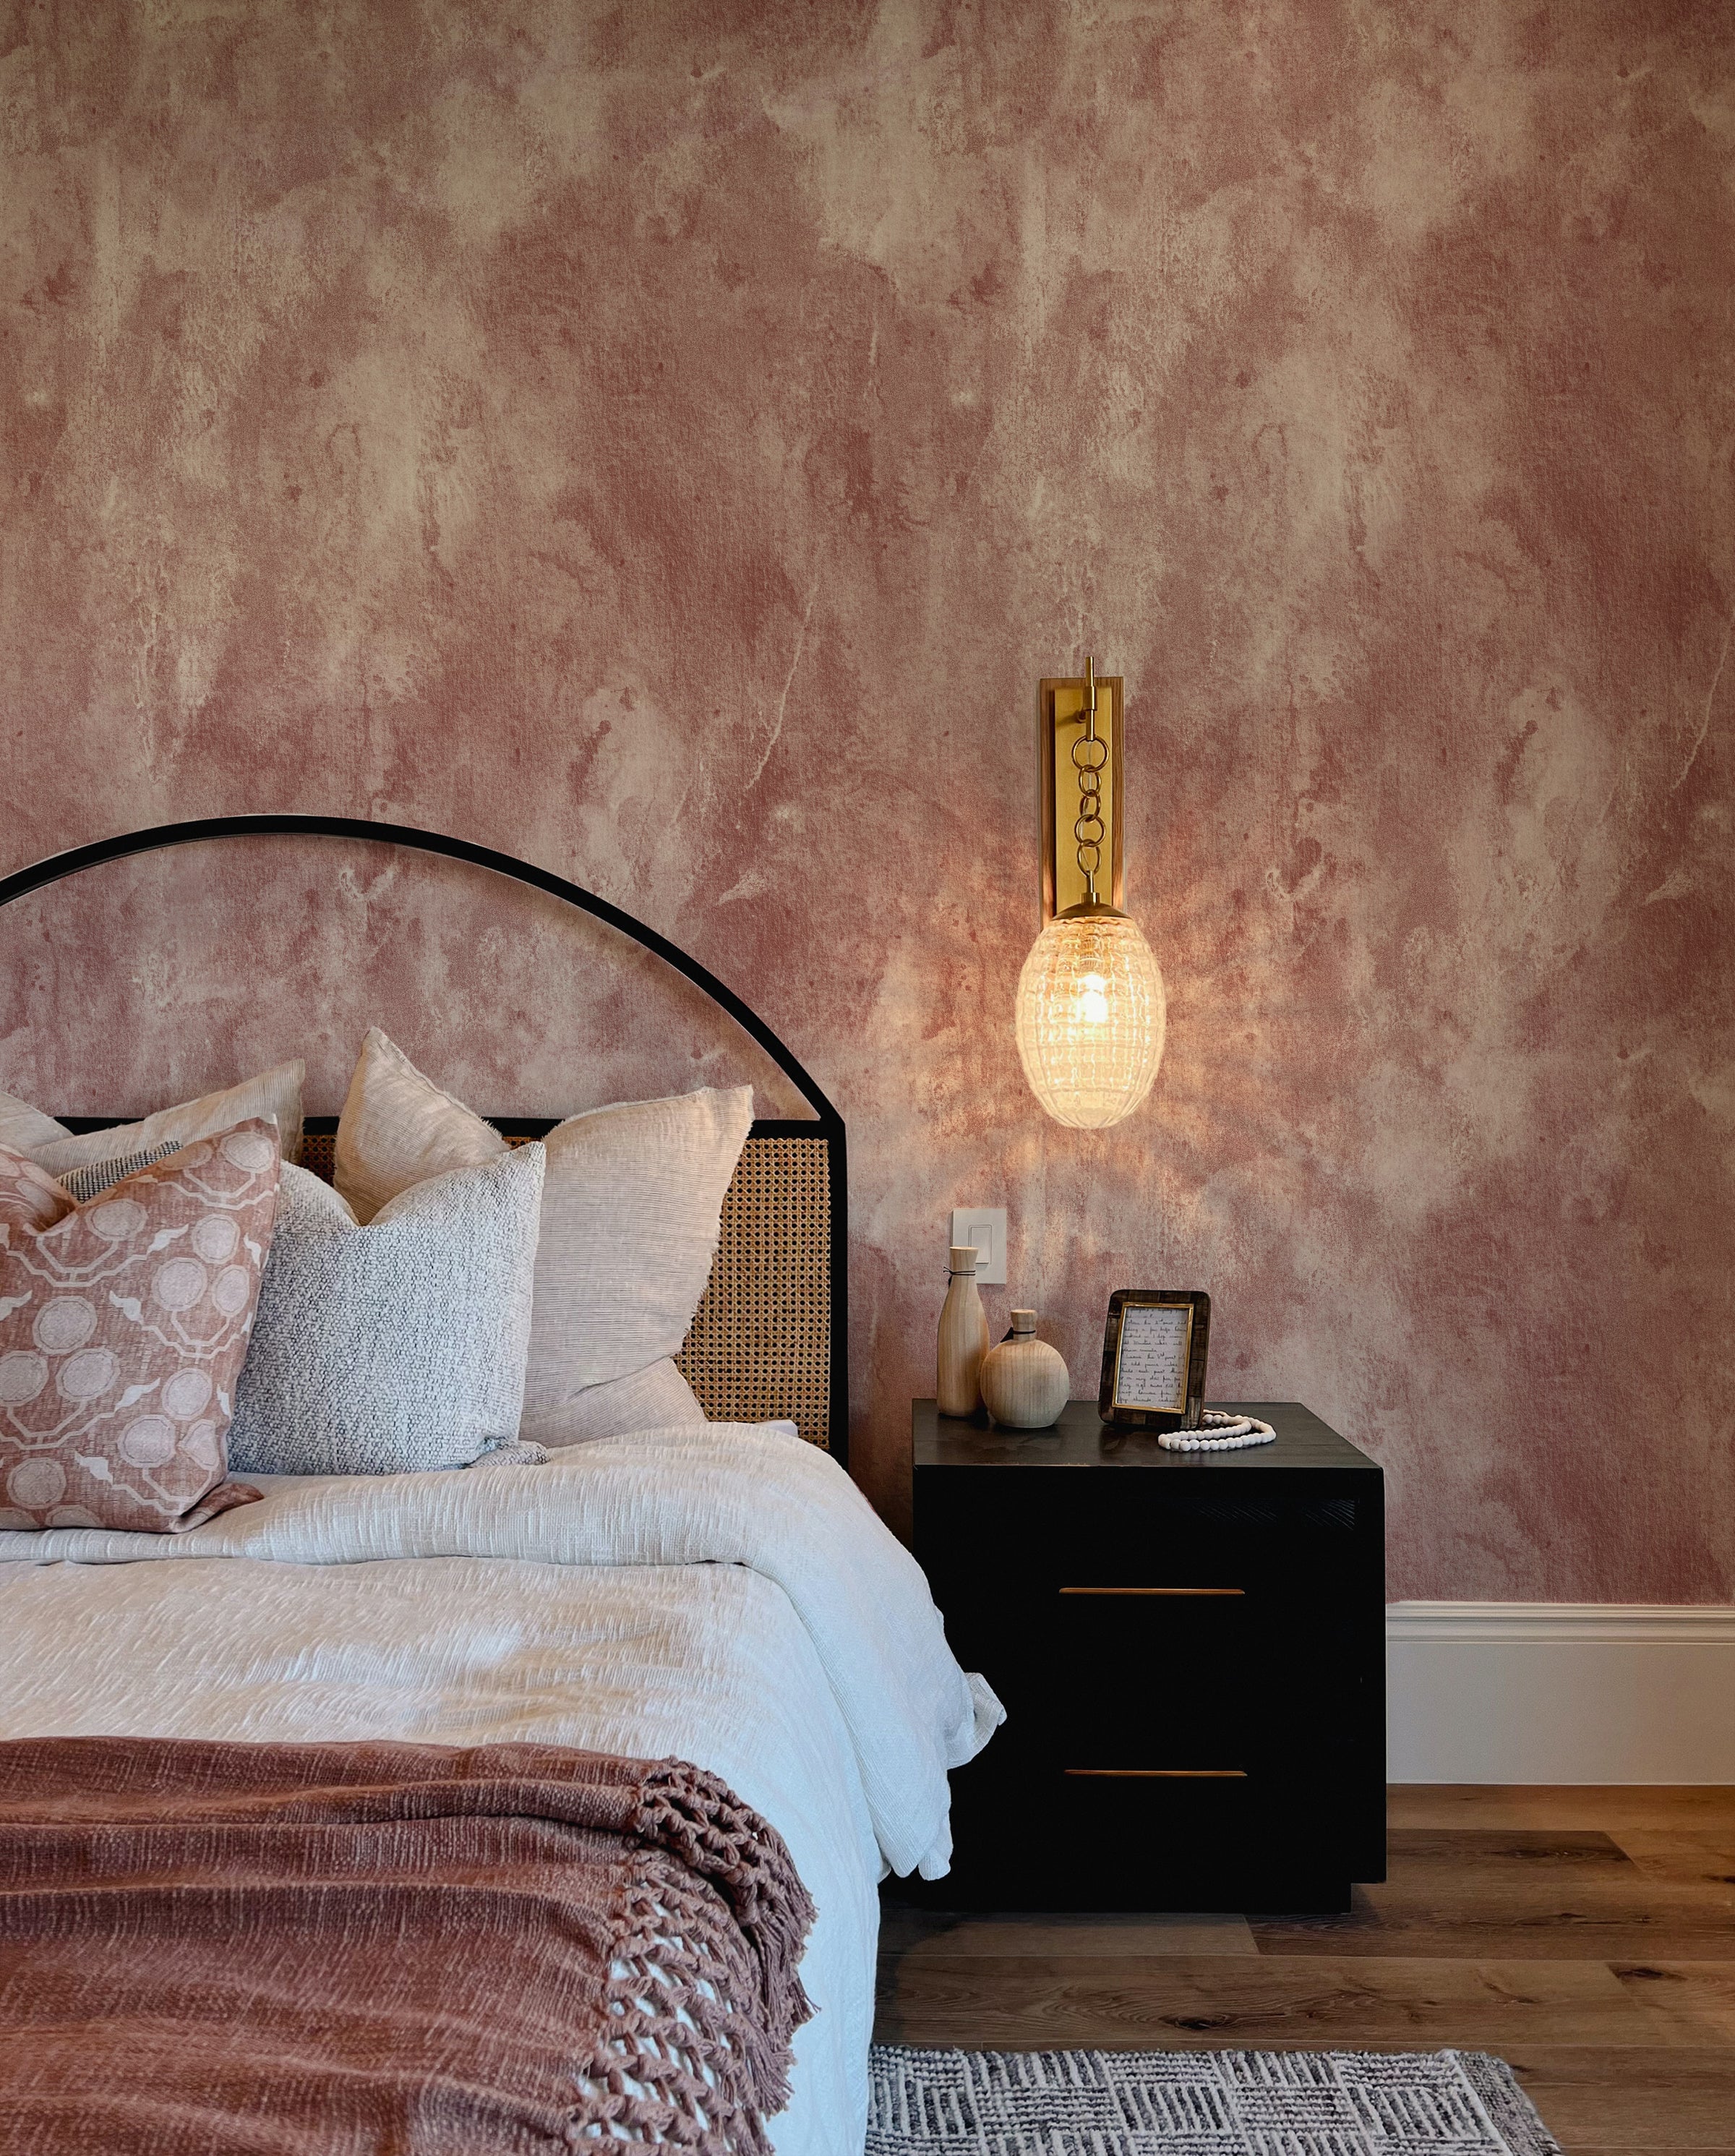 A stylish bedroom with a contemporary vibe, showcasing a black metal bed frame dressed in neutral linens with dusty rose accents. The Dusty Rose Limewash Wallpaper envelops the room in a cozy, inviting atmosphere.